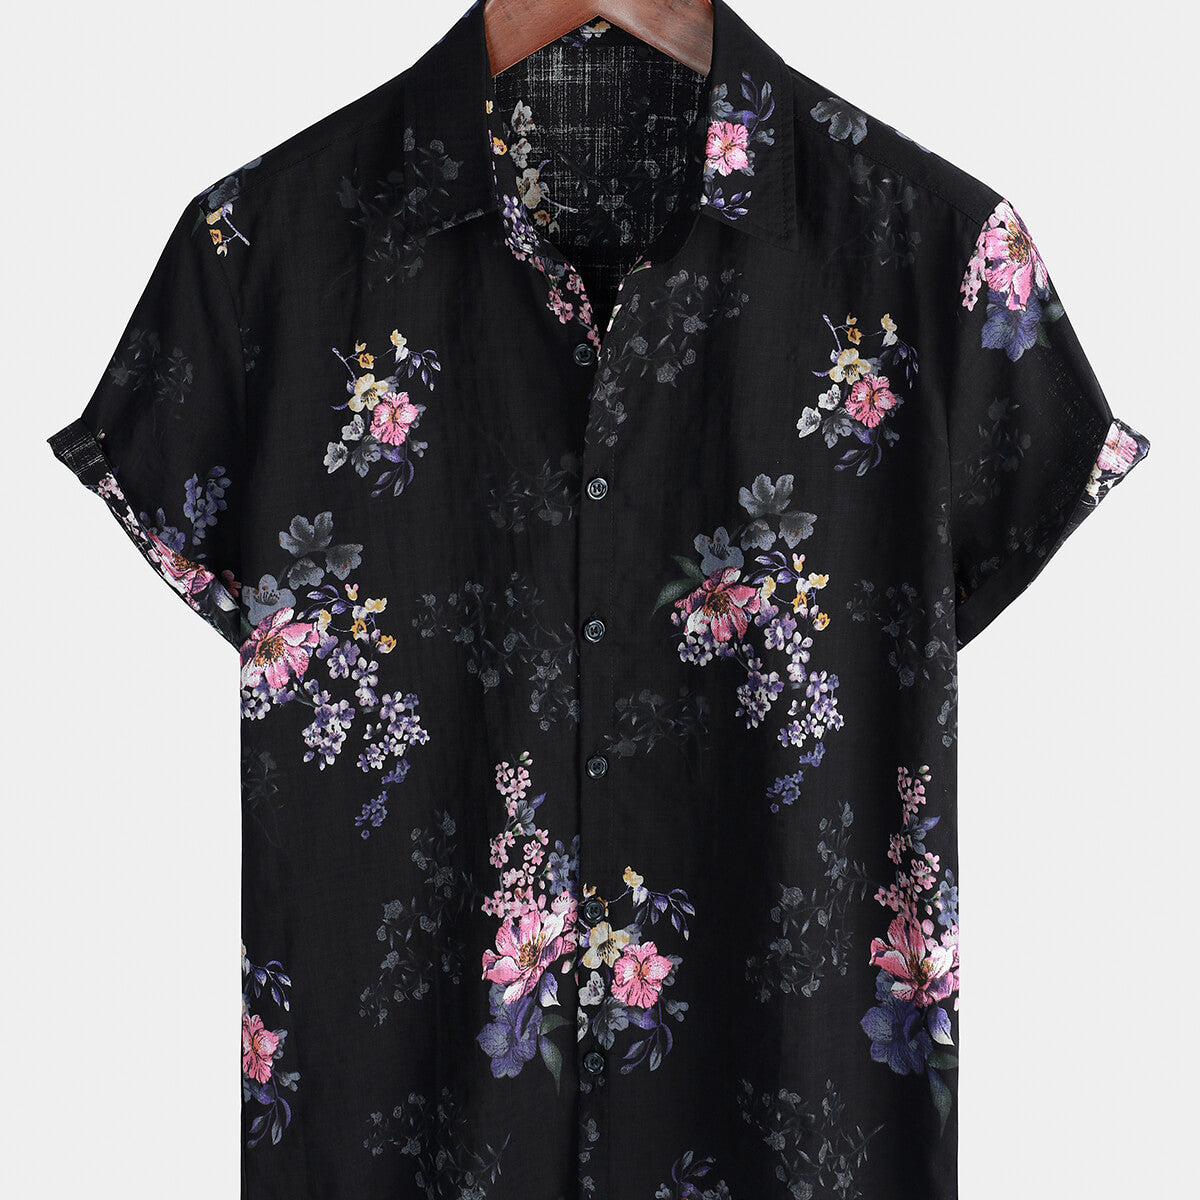 Men's Floral Button Up Short Sleeve Holiday Cotton Vintage Shirt